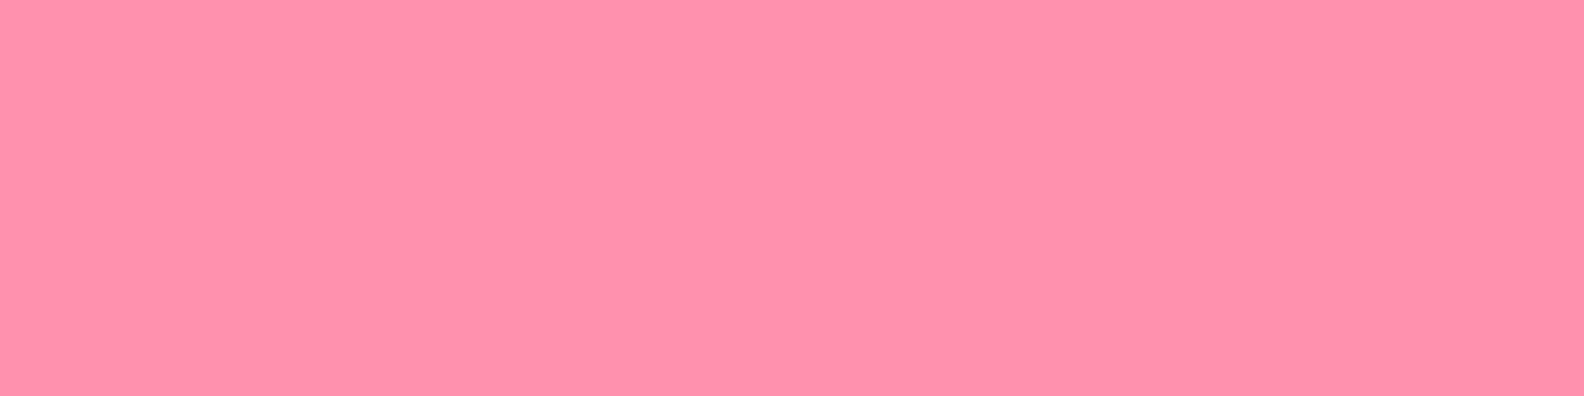 1584x396 Schauss Pink Solid Color Background